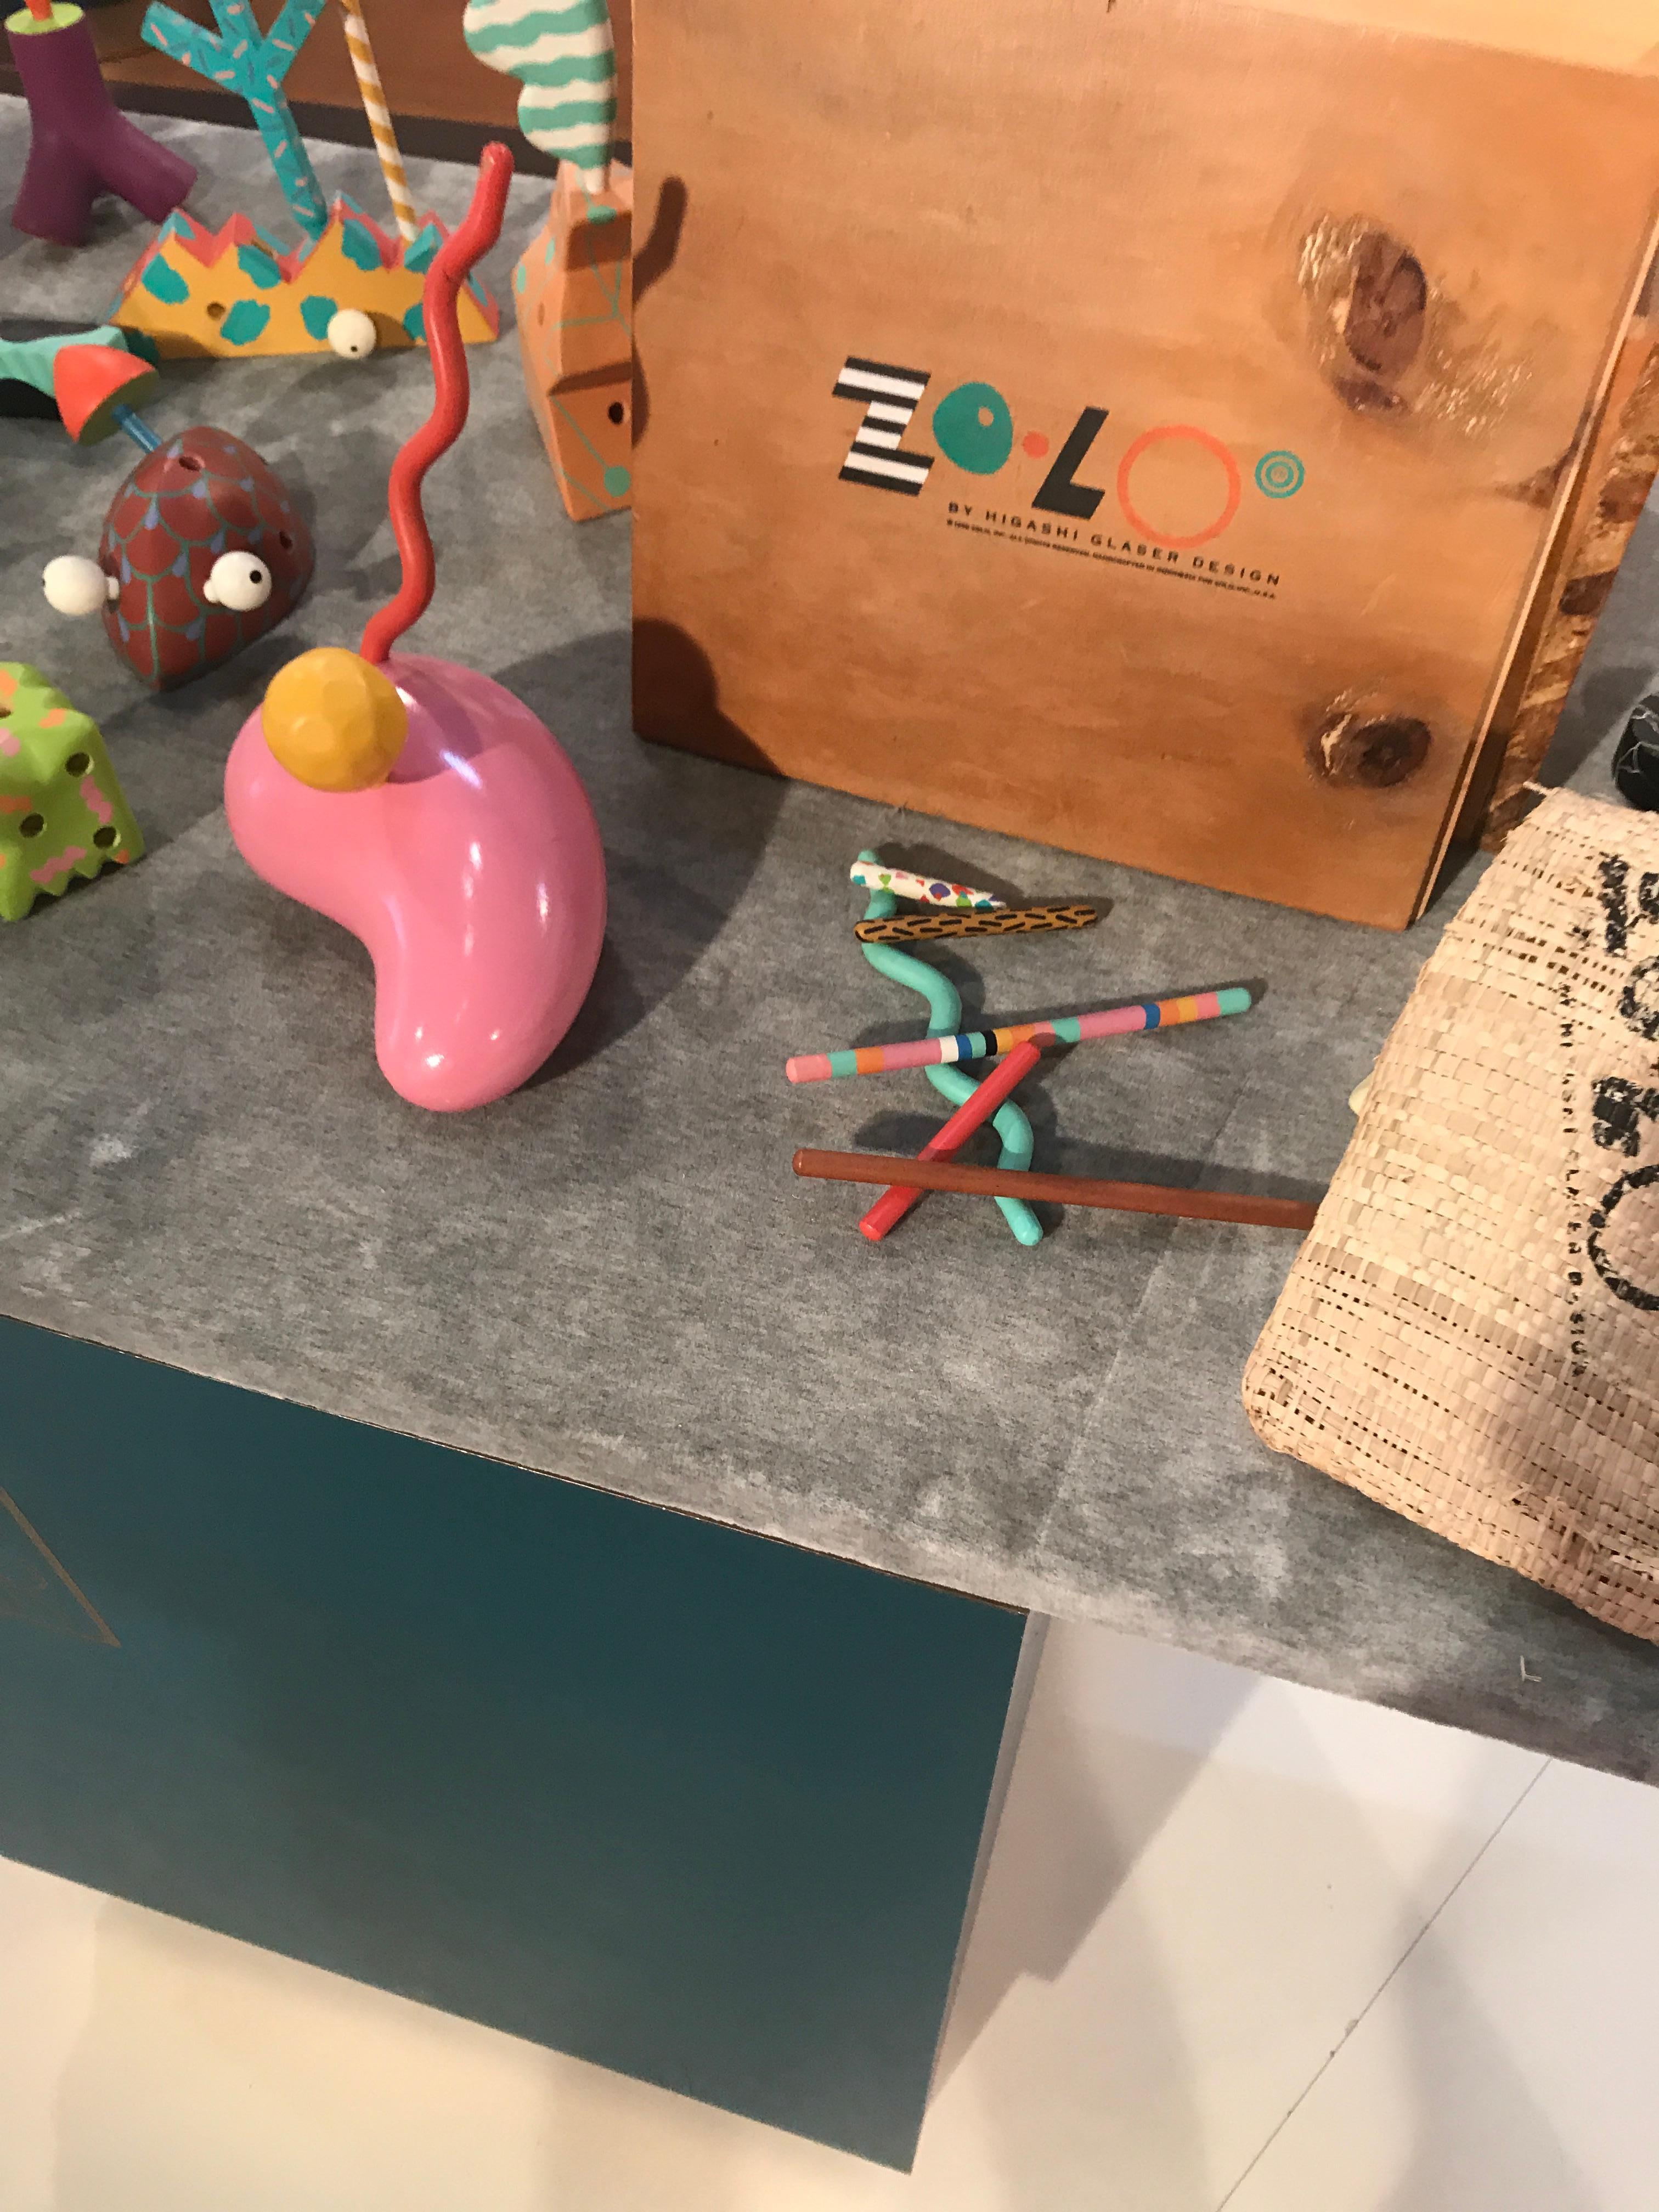 Memphis ZoLO Wooden Toys designed by Byron Glaser and Sandra Higashi for Moma 2